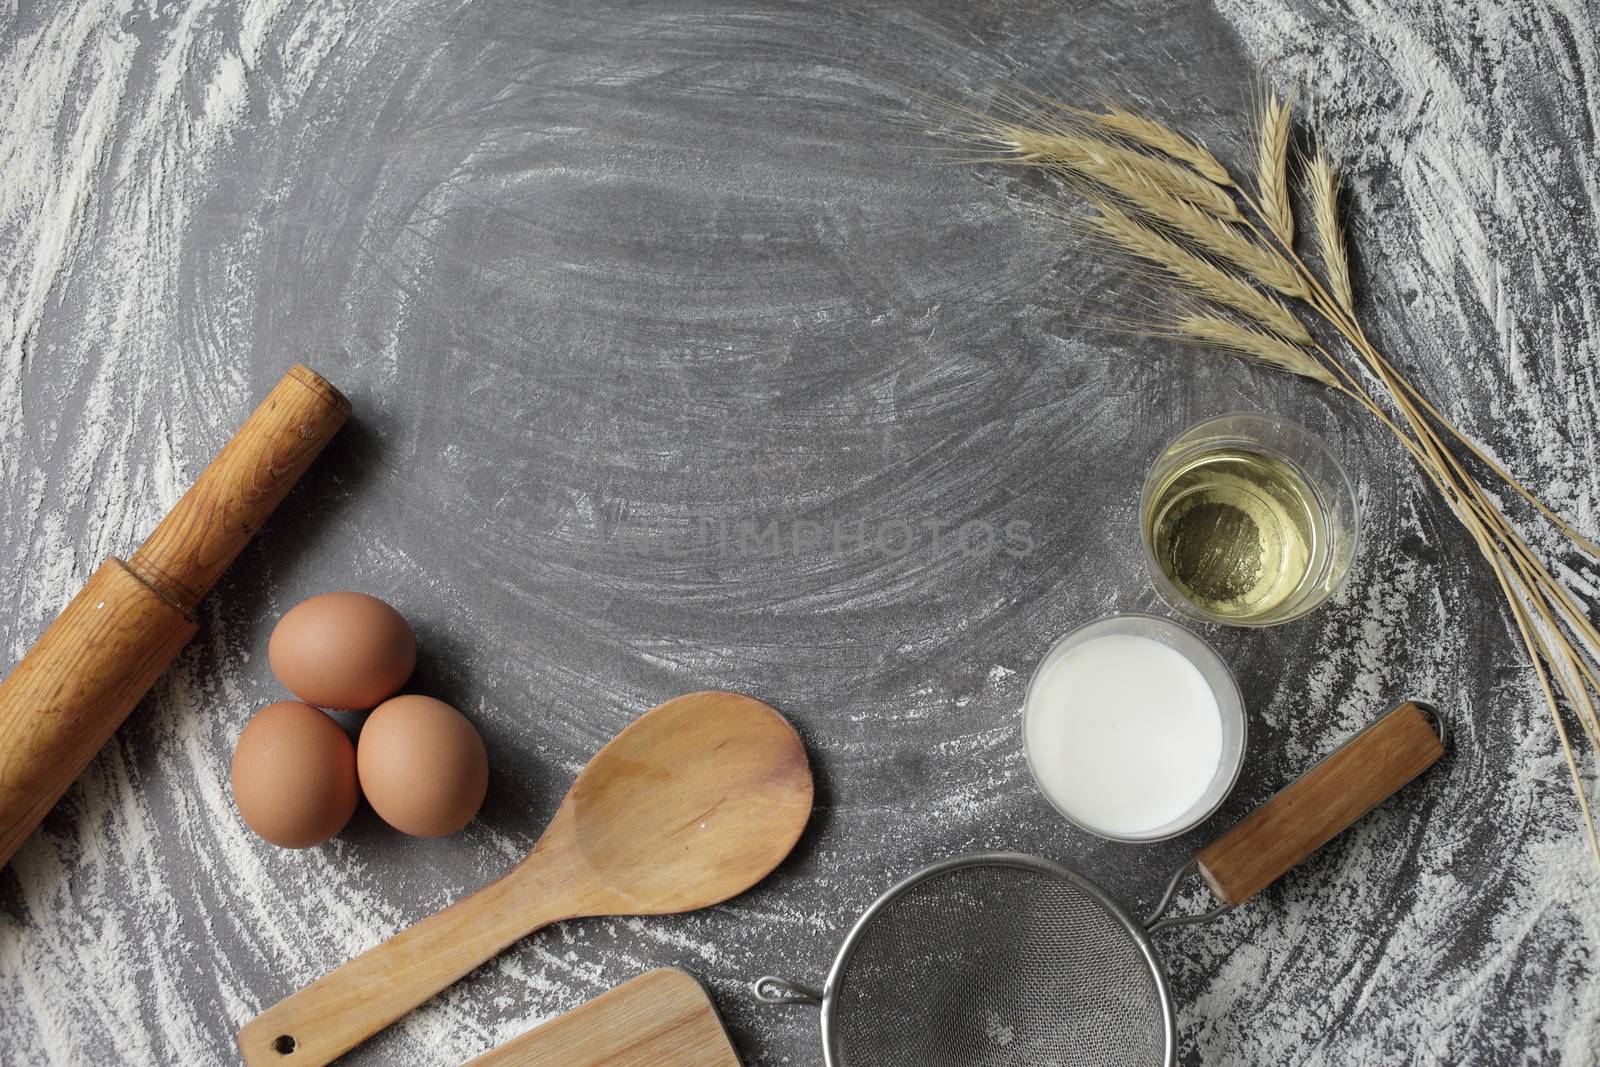 Egg, flour, olive oil, milk, wheat ears, kitchen tool on gray table background. by selinsmo